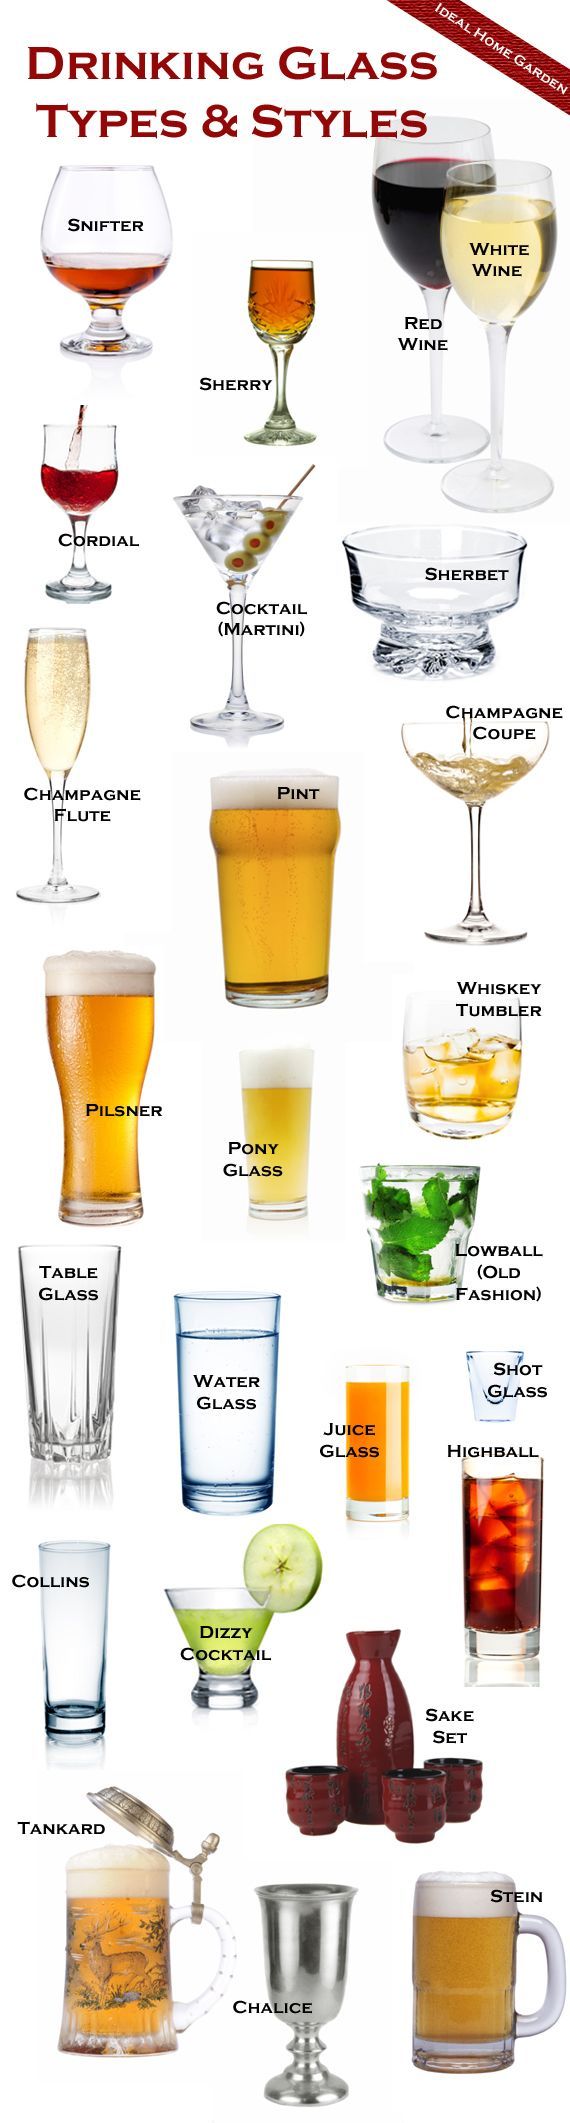 The different types of drinking glasses, and explanations of what theyre used for.